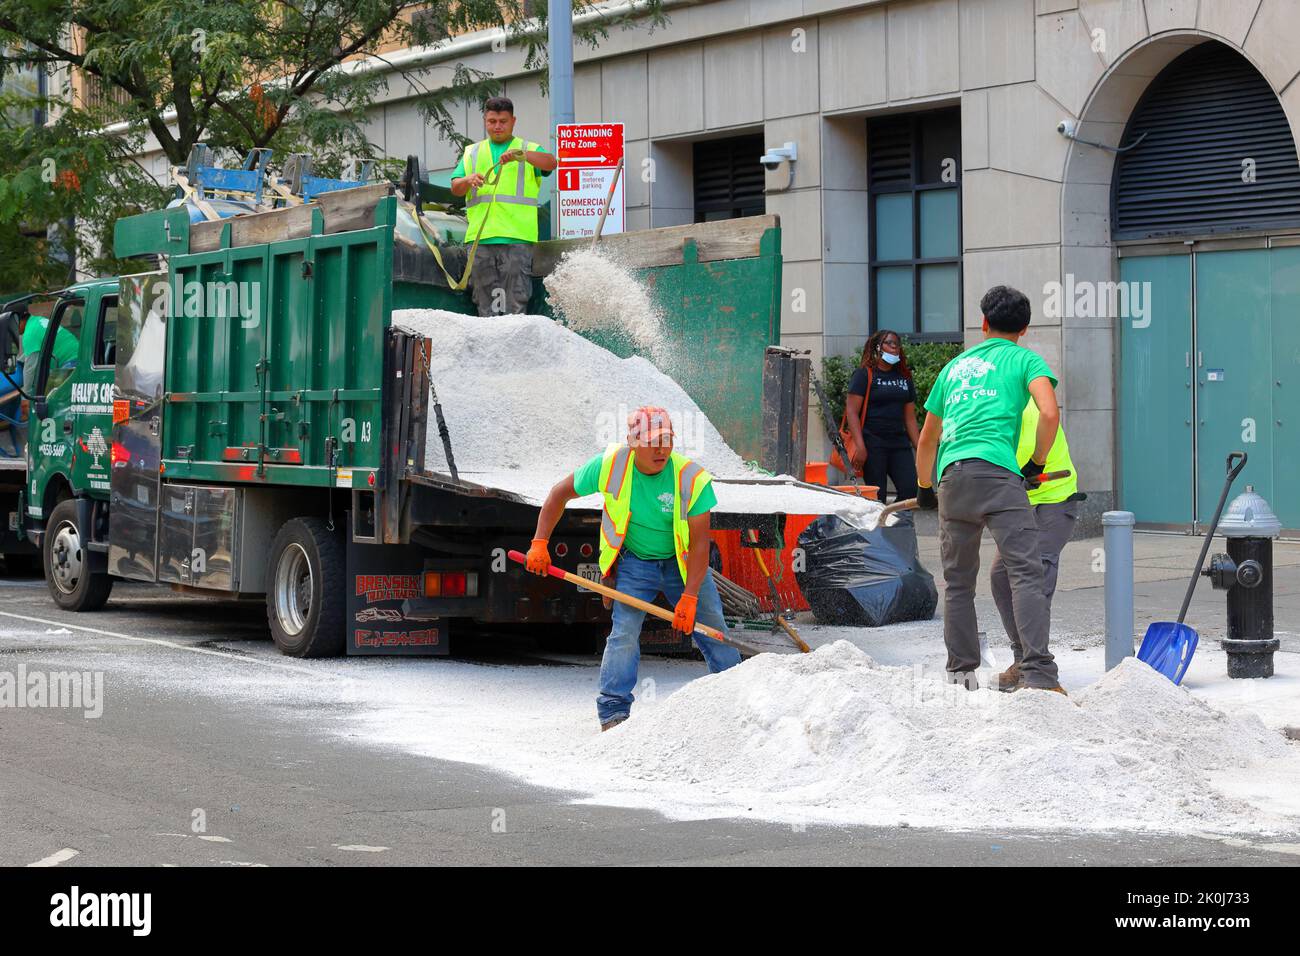 Landscaping workers shovel a pile of crushed limestone onto the back of a truck in New York City. Stock Photo